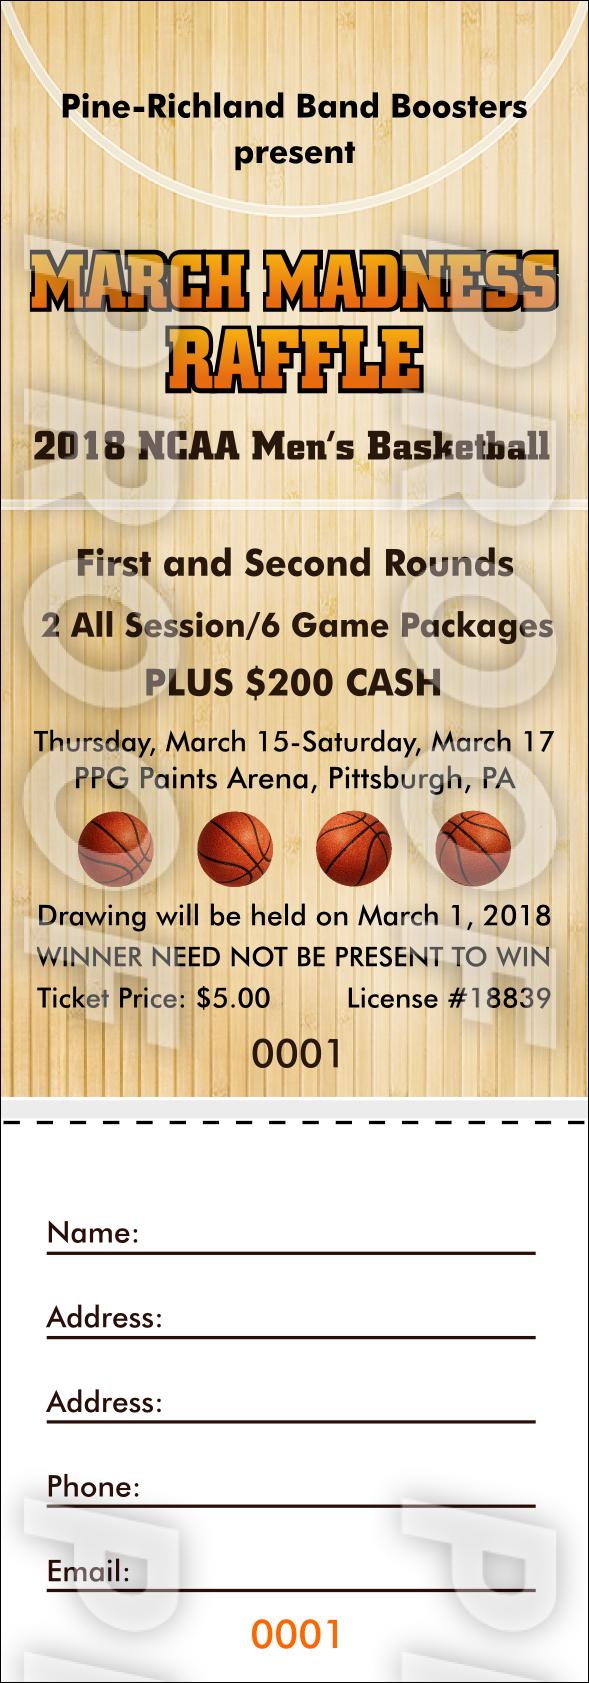 2018 Spring March Madness & and Cash Raffle Prize Package includes 2 All Session six-game ticket packages to 2018 NCAA basketball first and second rounds, plus $200 cash.